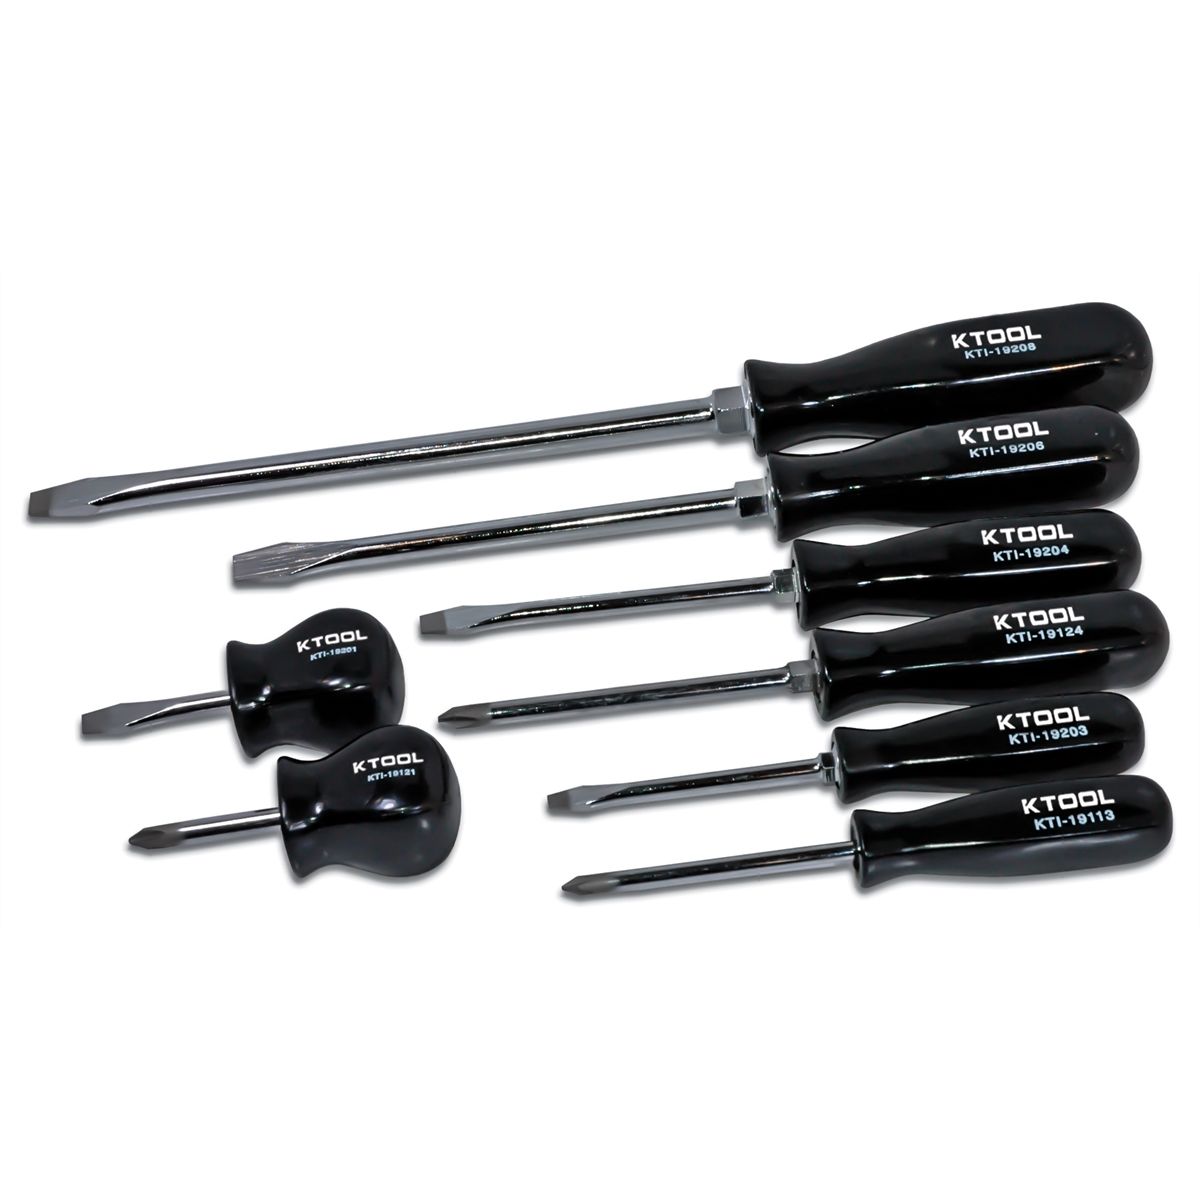 8 Piece Green Phillips and Slotted Screwdriver Set